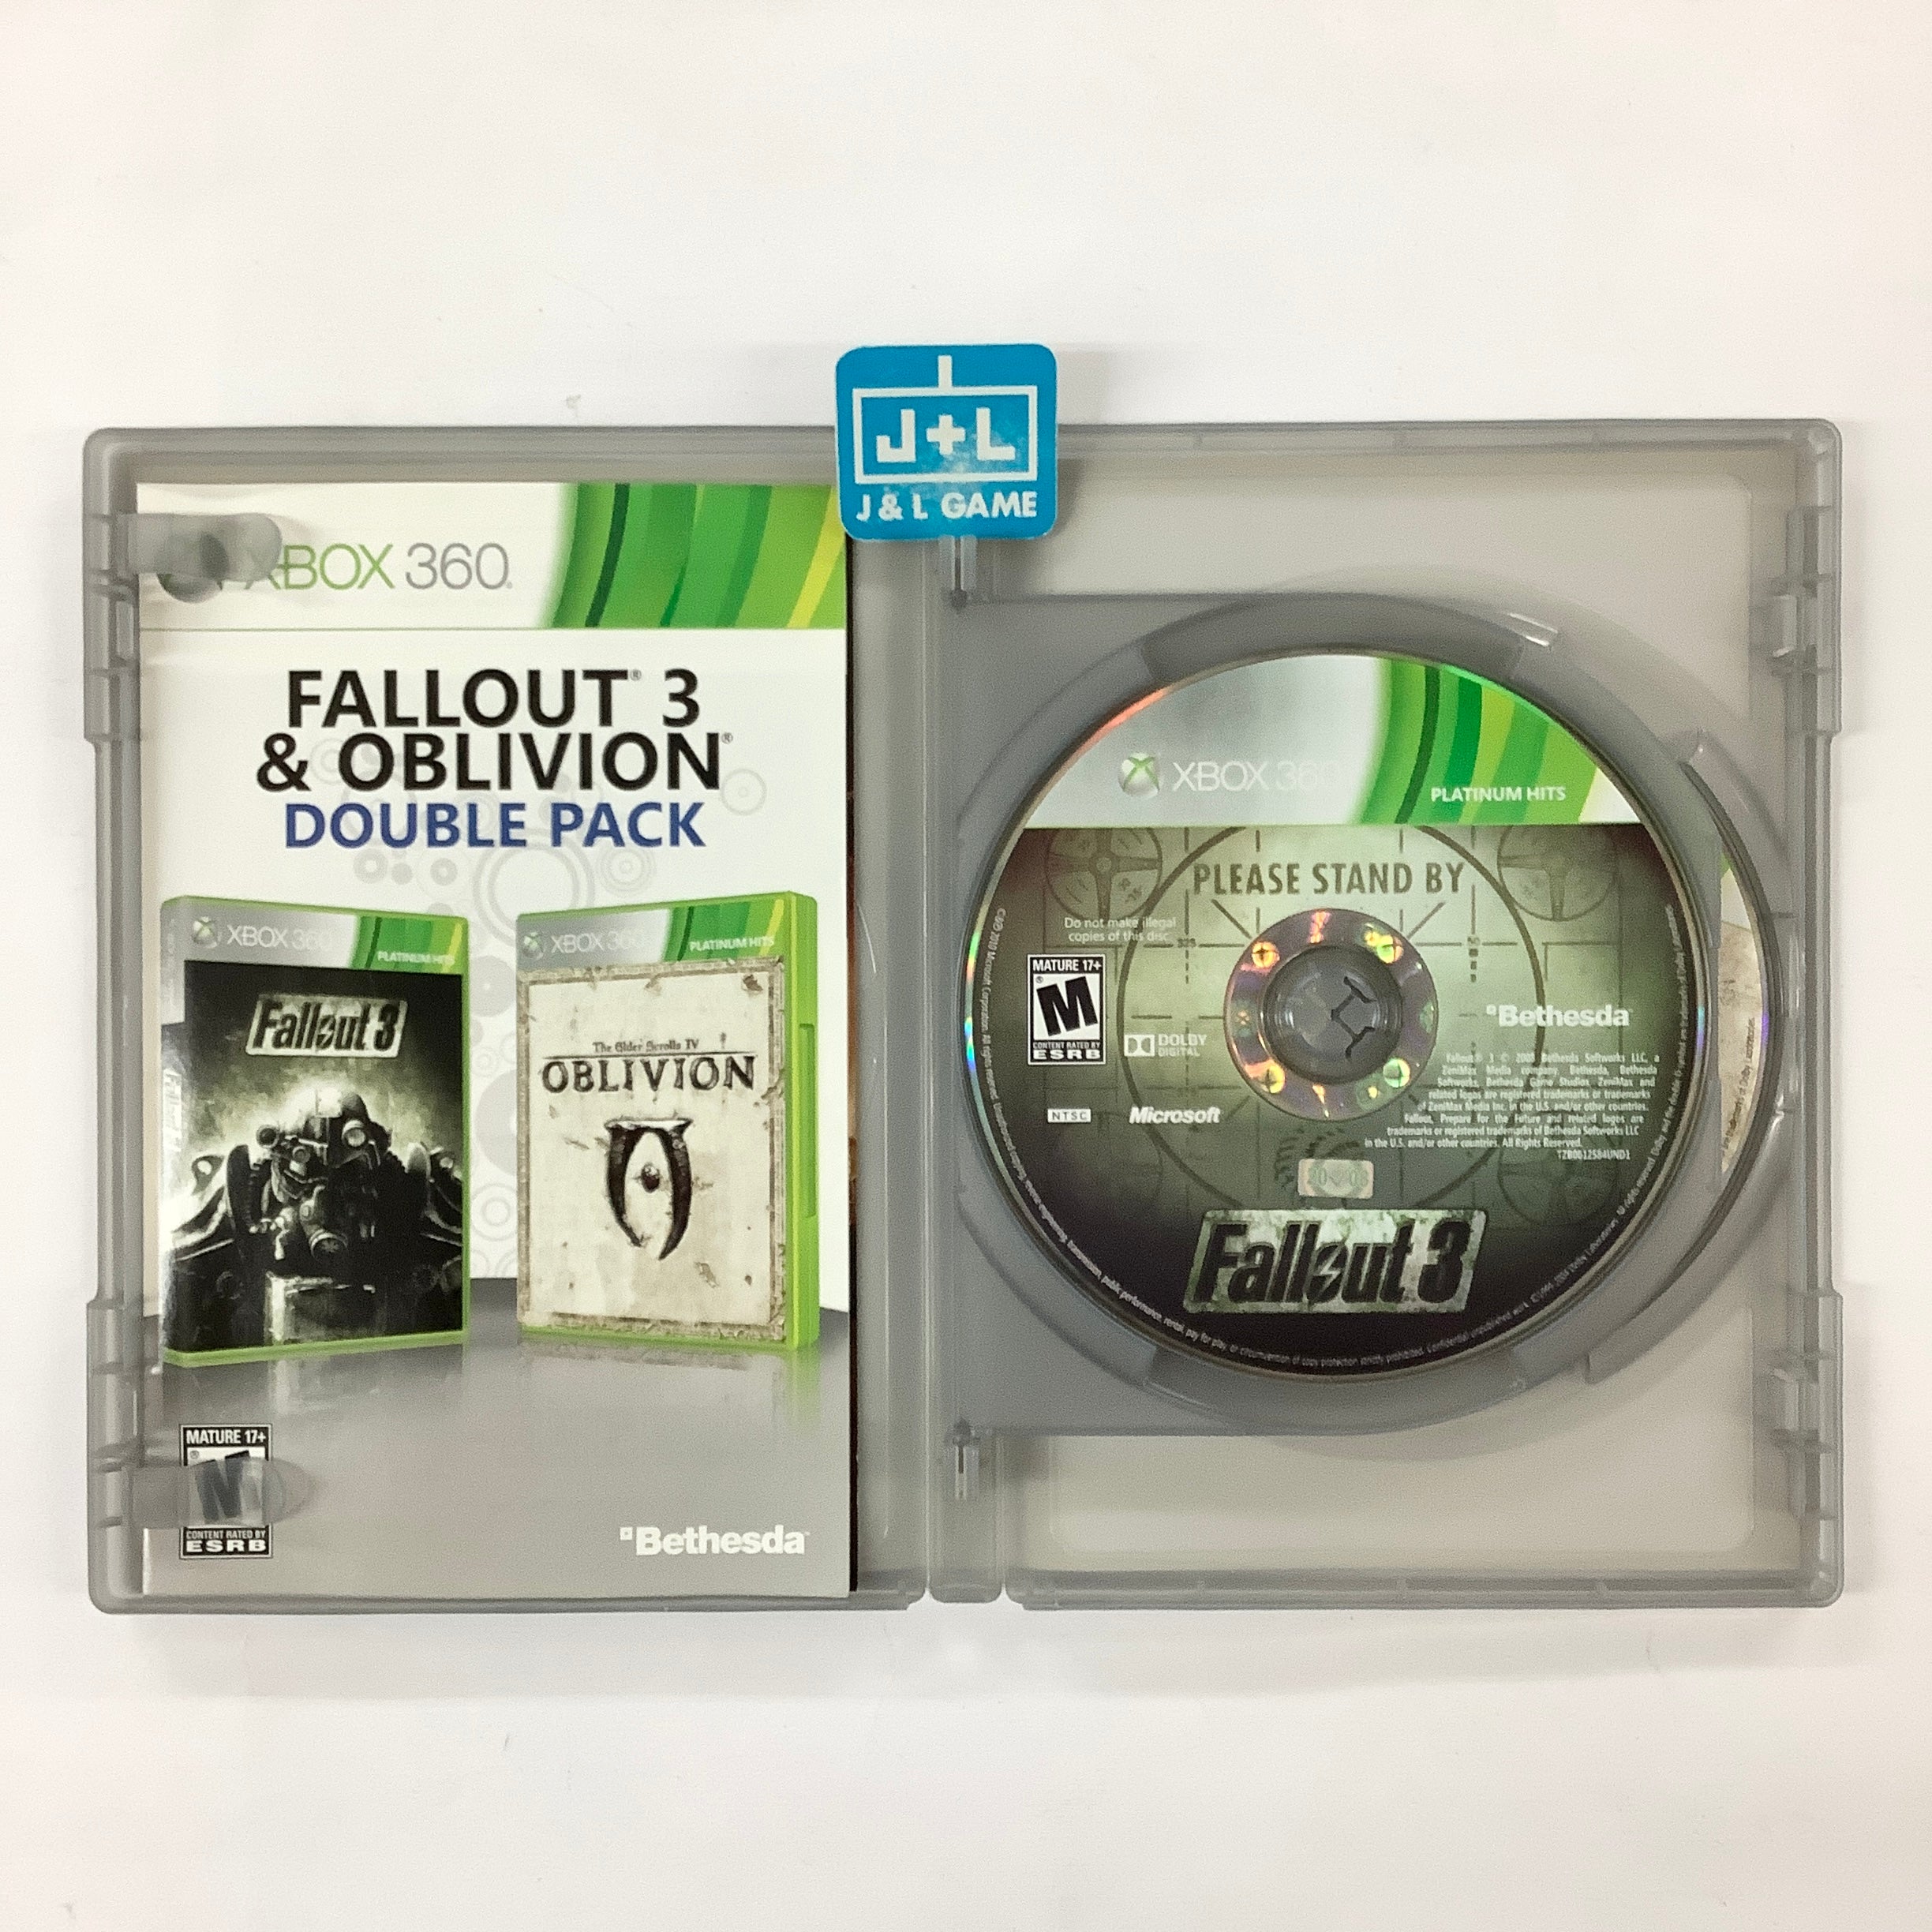 Fallout 3 & Oblivion Double Pack (Platinum Hits) - Xbox 360 [Pre-Owned] Video Games Bethesda Softworks   